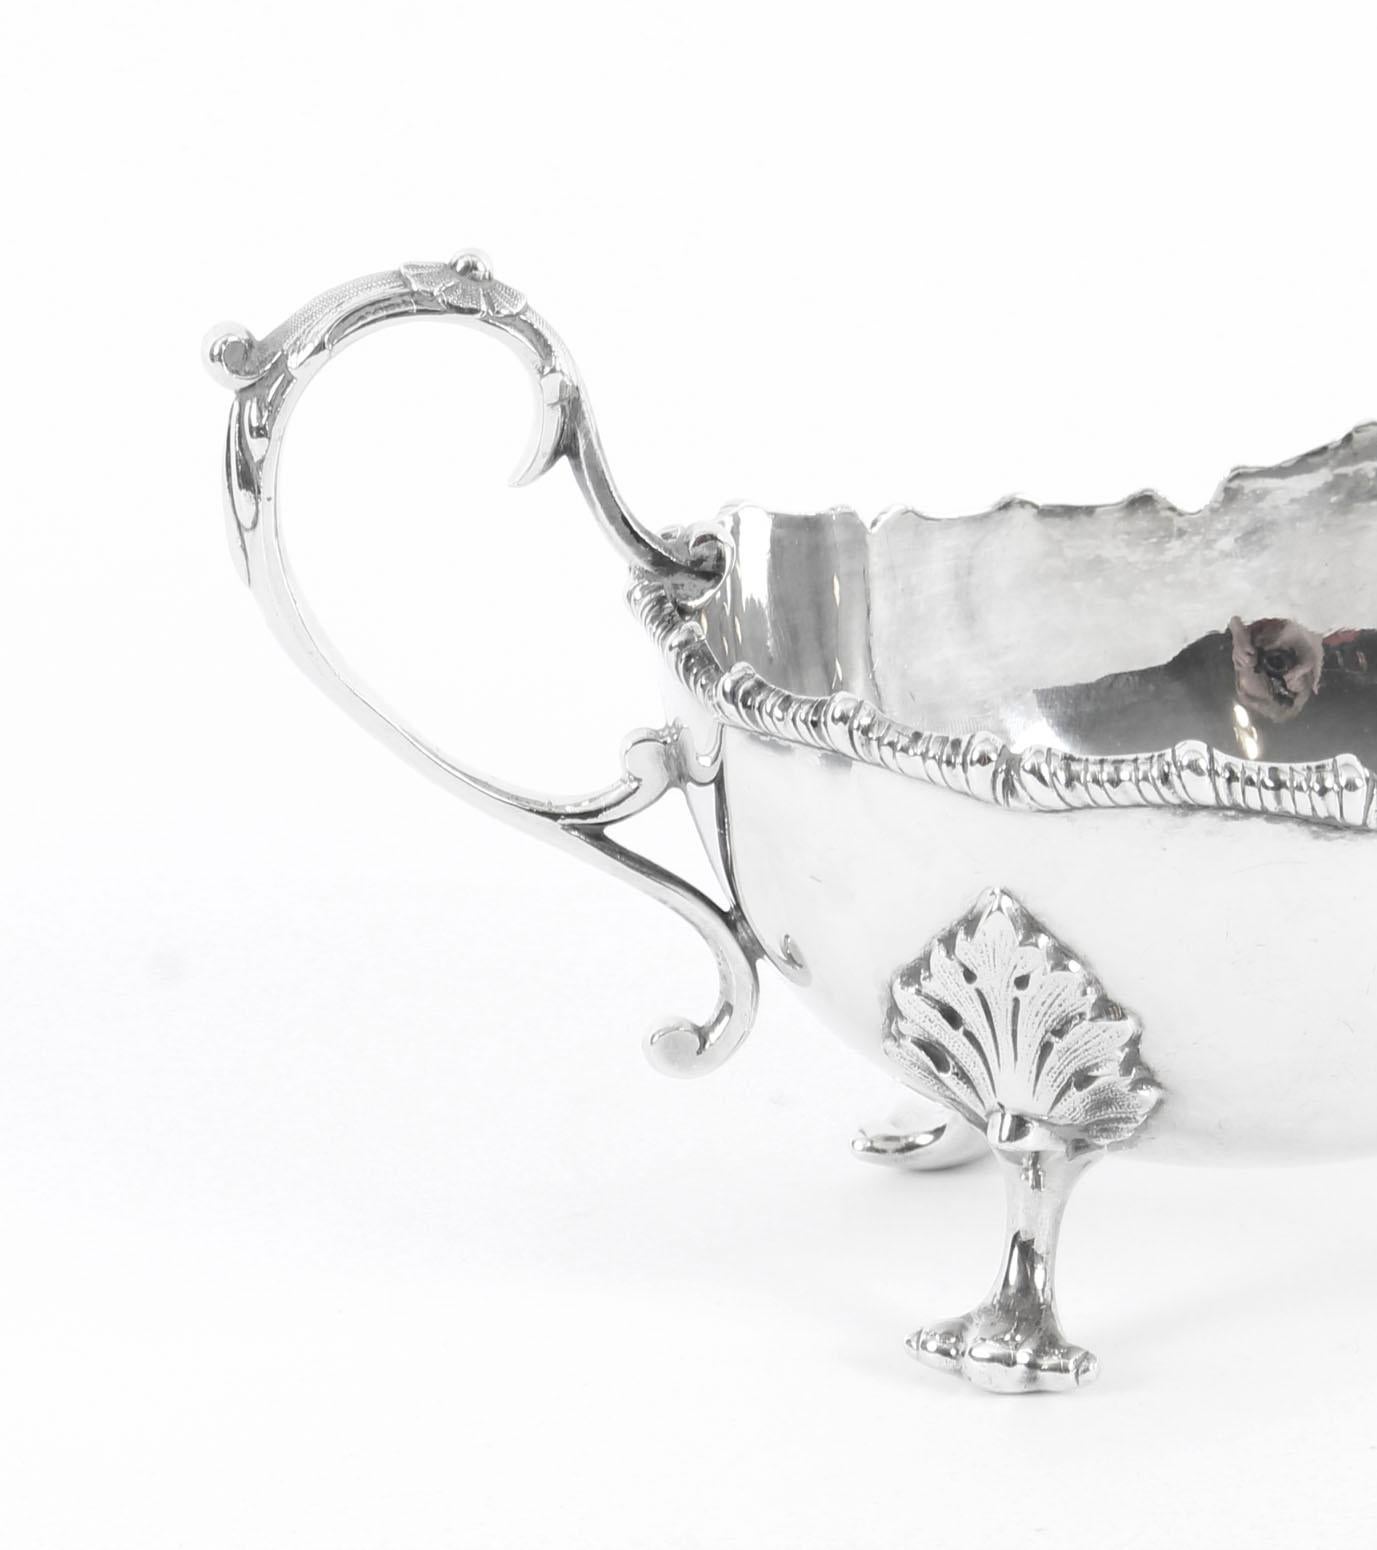 Antique English Silver Plated Sauce Boats James Dixon & Sons 19th Century, Pair 1